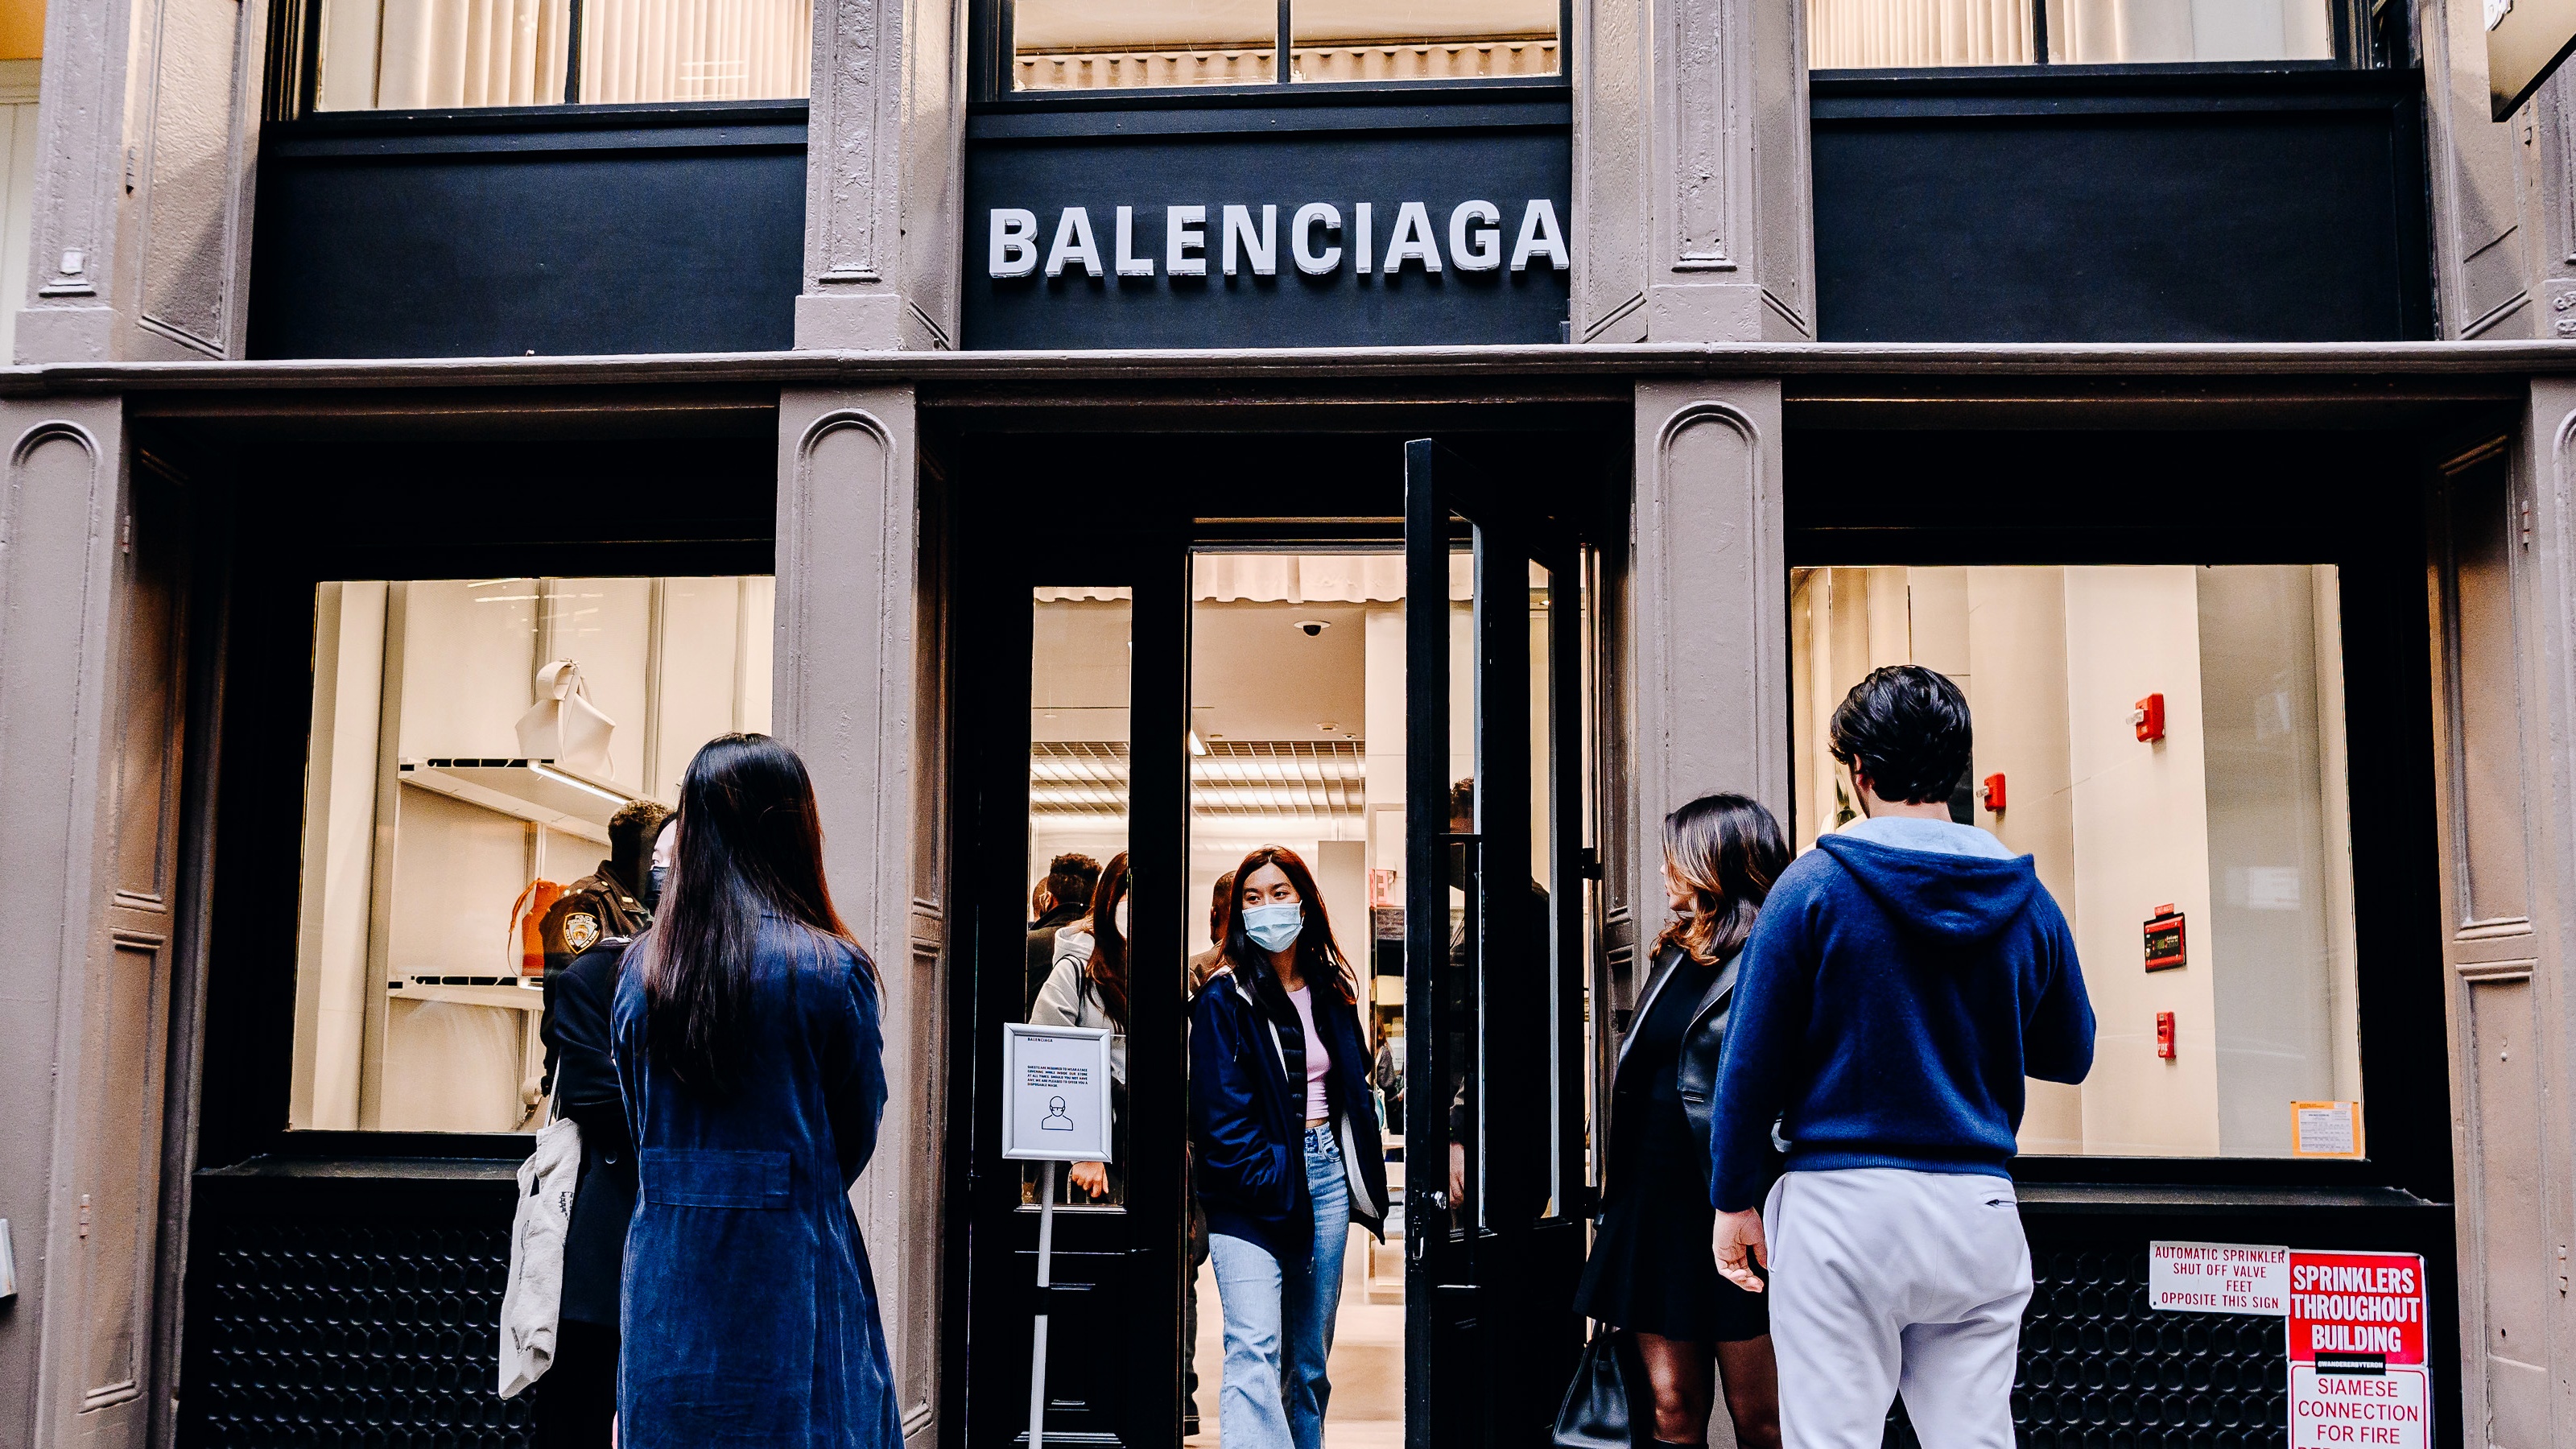 Top Balenciaga Designer Is Leaving the Company - The New York Times